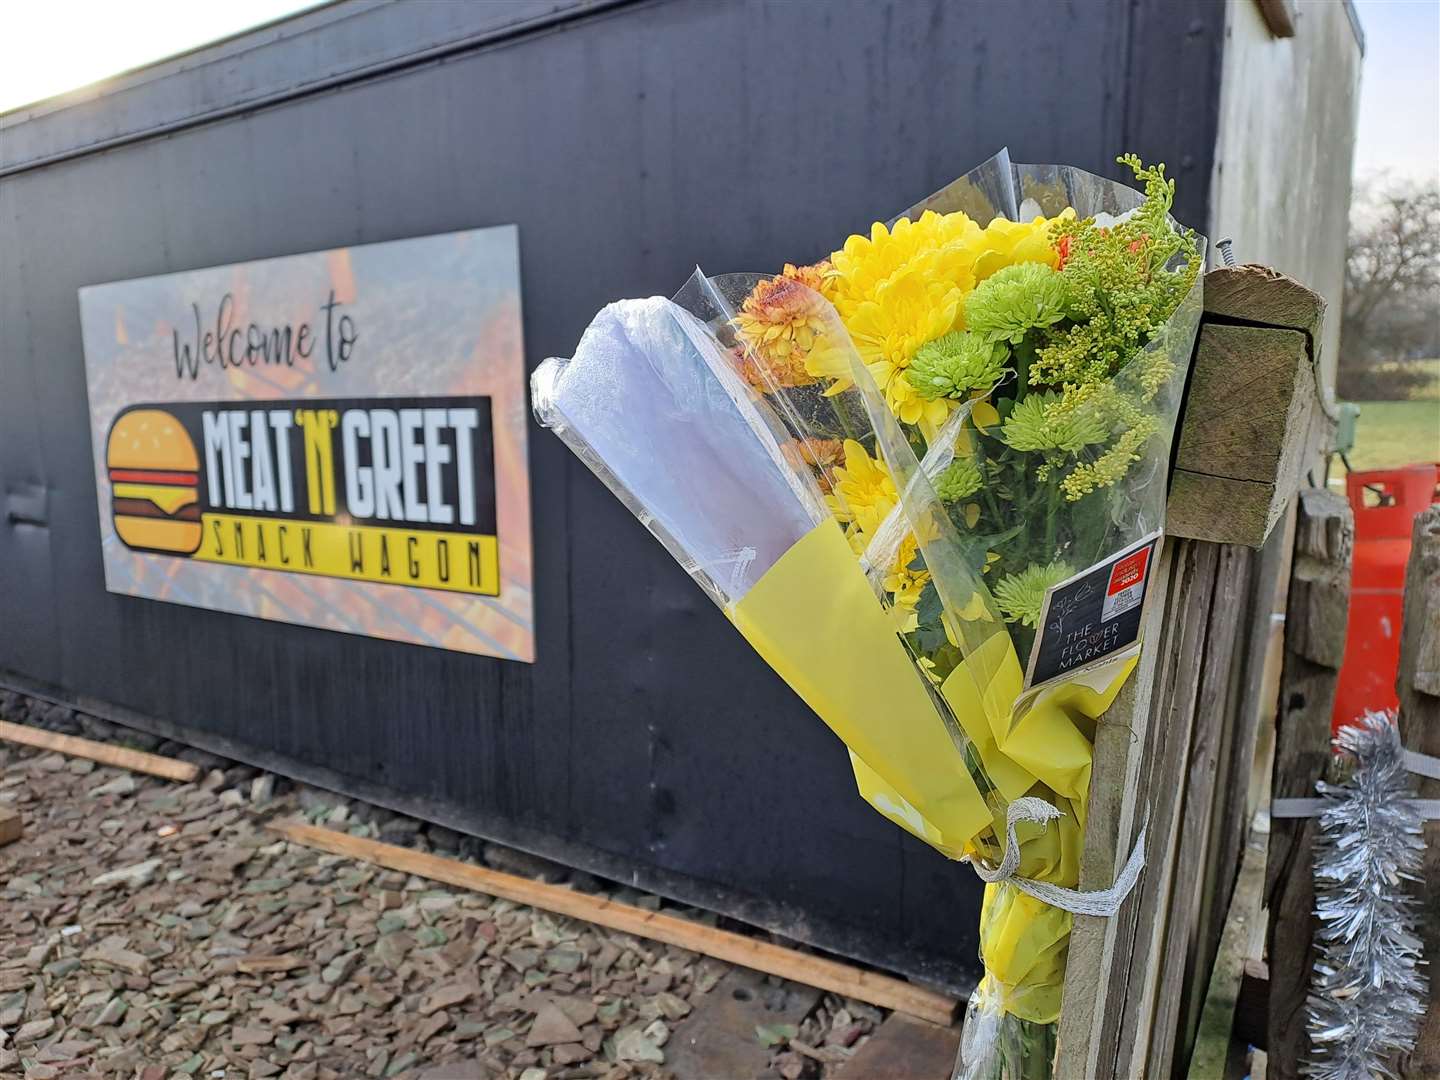 Tributes have been left at the burger hut where Leah Churchill and Brooke Wanstall were found dead